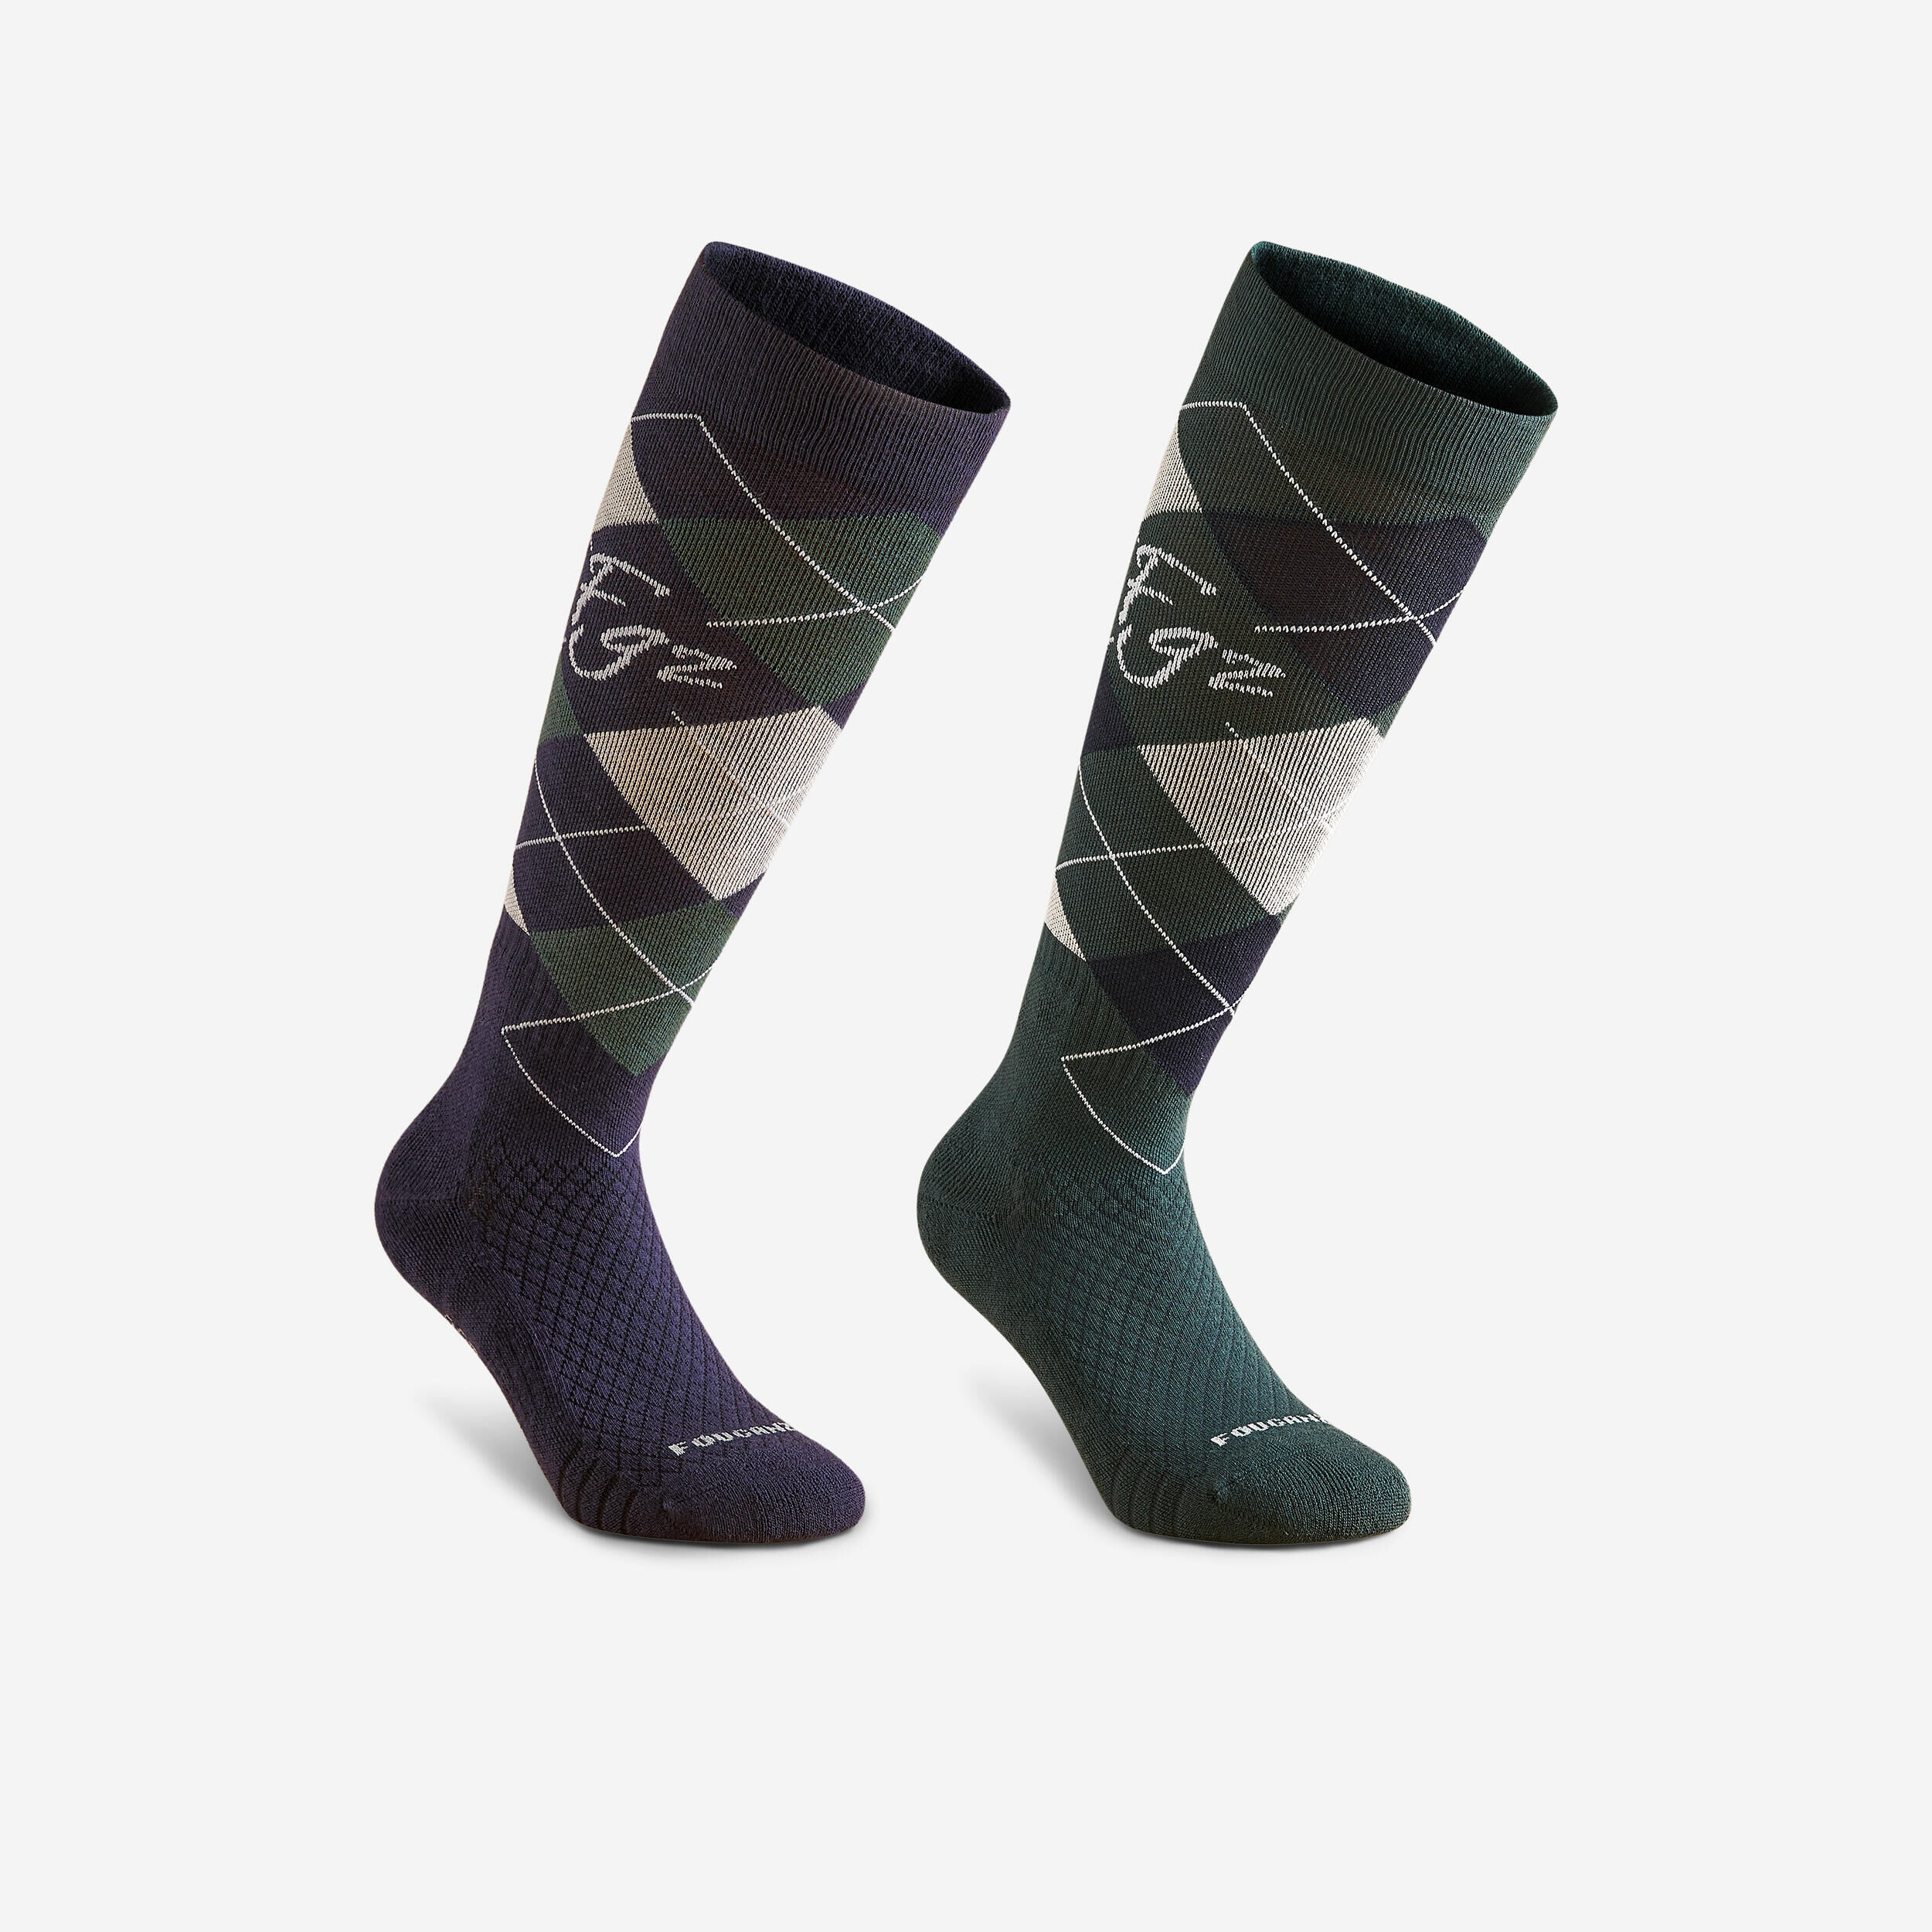 FOUGANZA Adult Horse Riding Socks 500 - Blue/Black/Larch Green GraphPack of 2